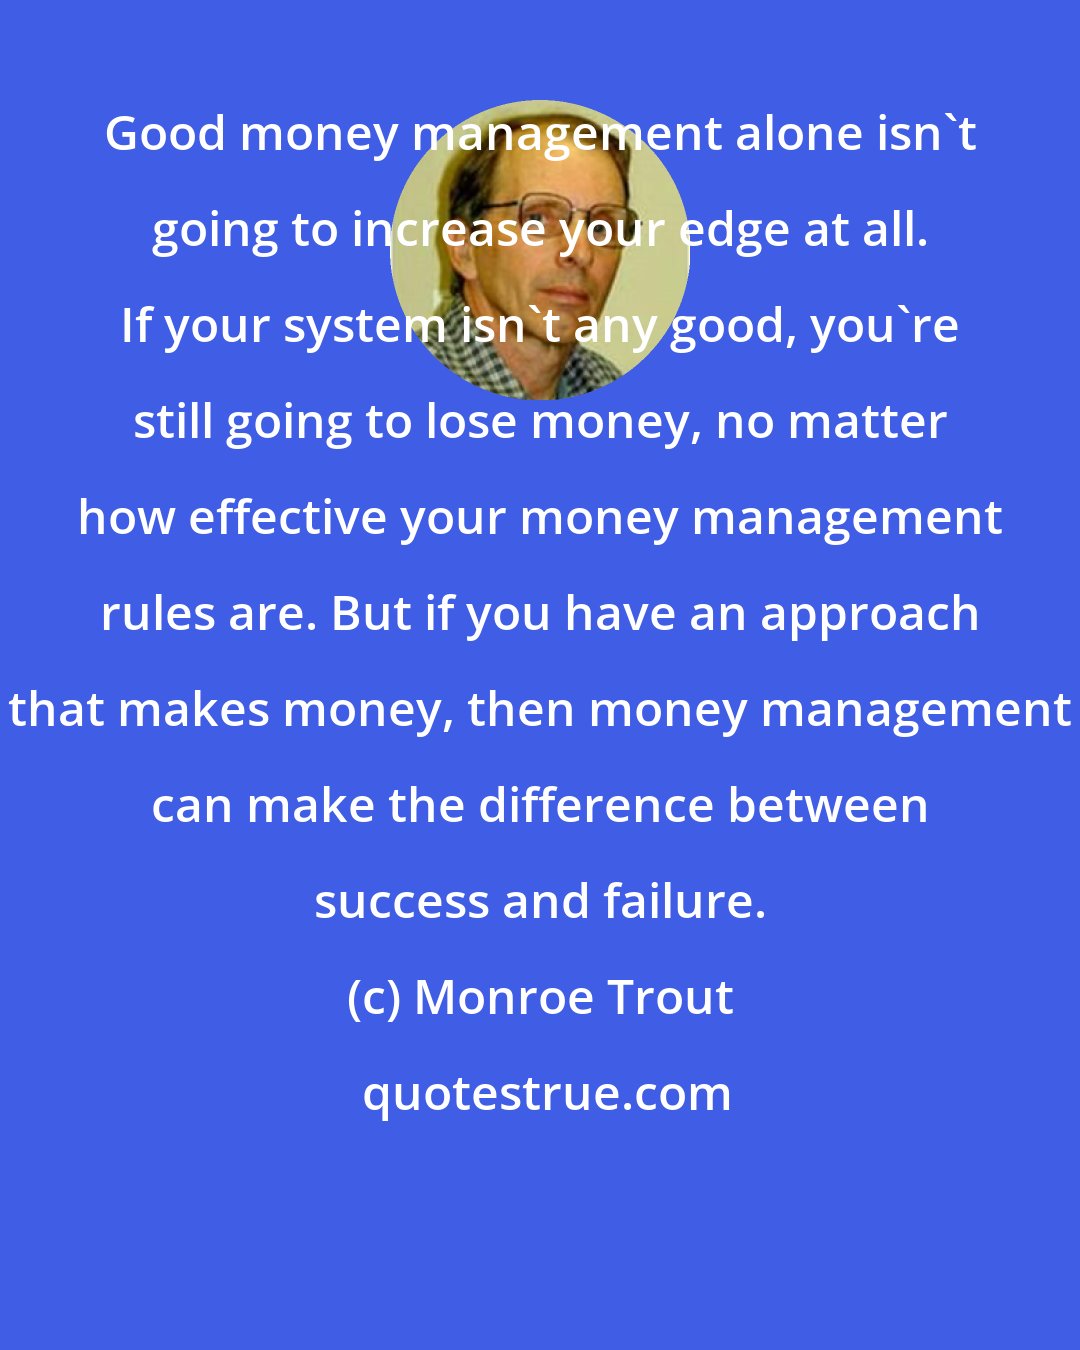 Monroe Trout: Good money management alone isn't going to increase your edge at all. If your system isn't any good, you're still going to lose money, no matter how effective your money management rules are. But if you have an approach that makes money, then money management can make the difference between success and failure.